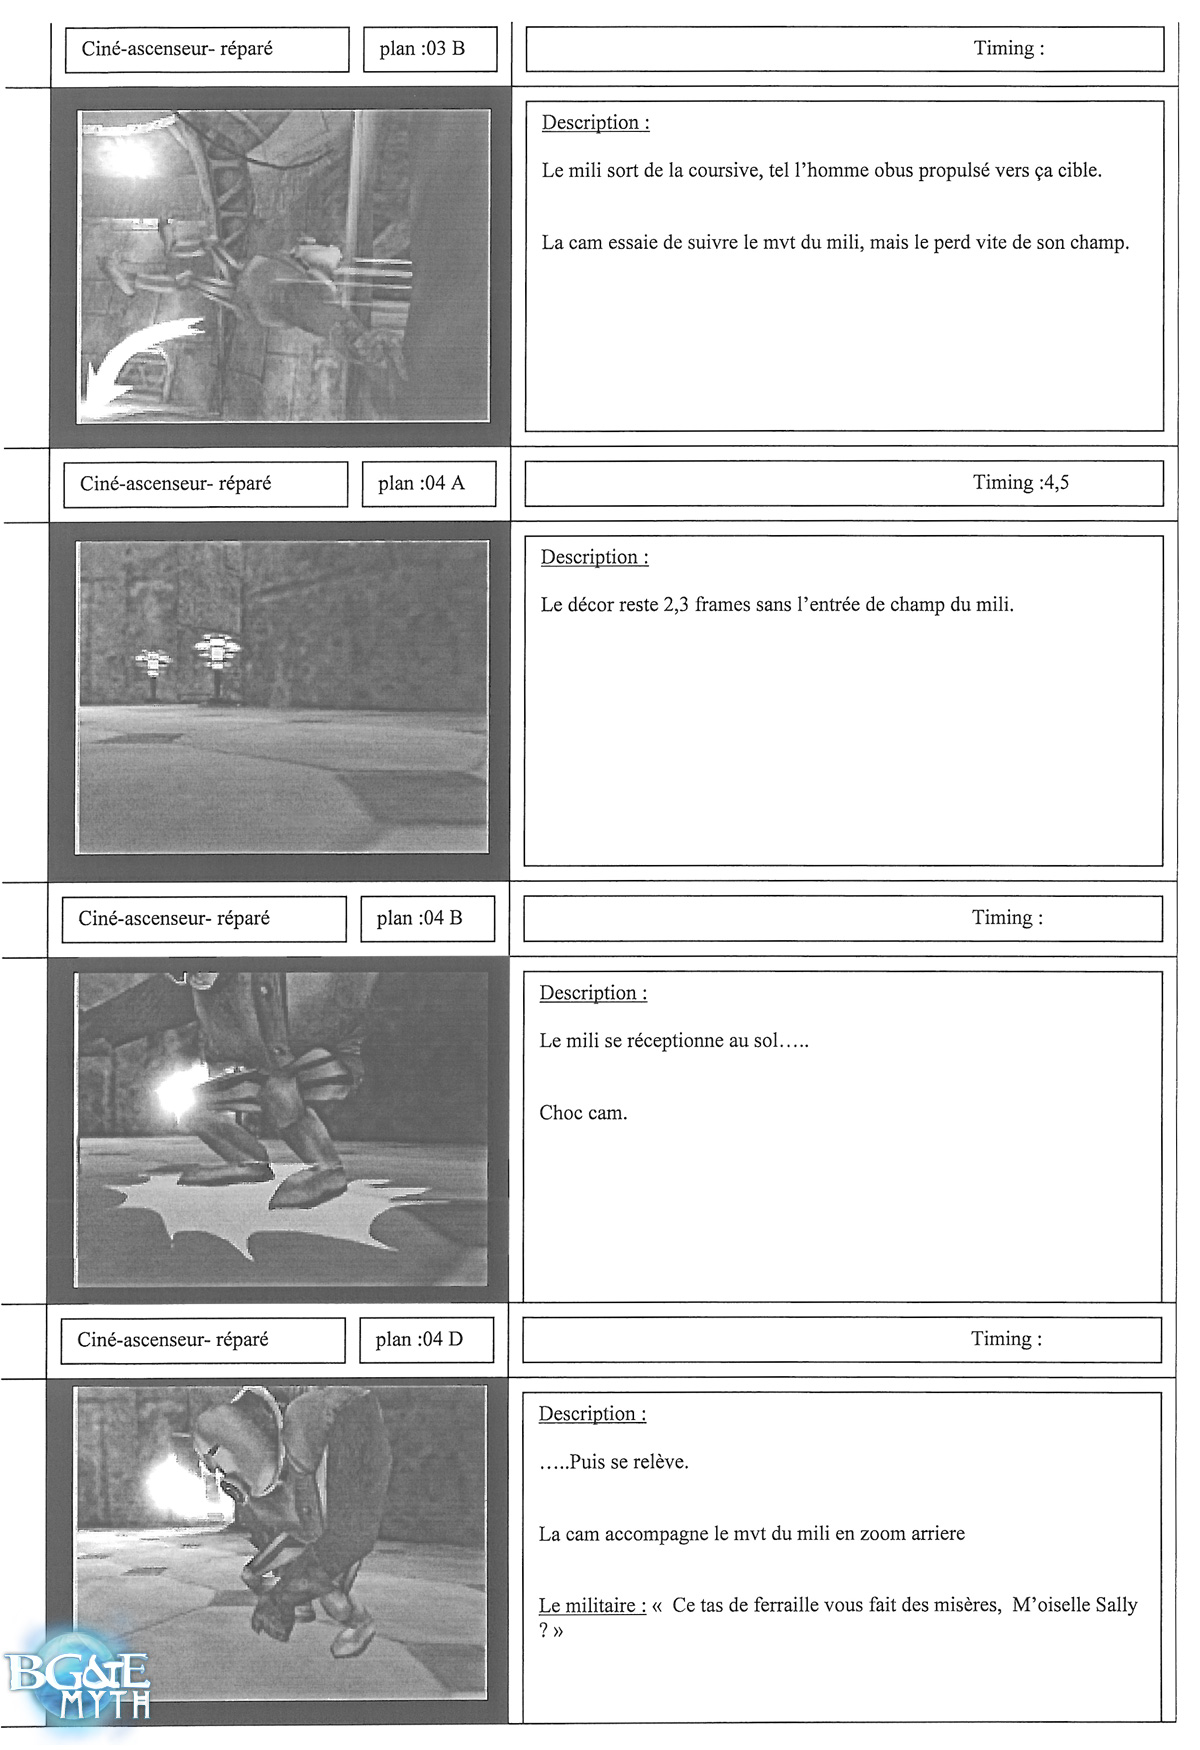 [Storyboard] L'homme canon - Page 3